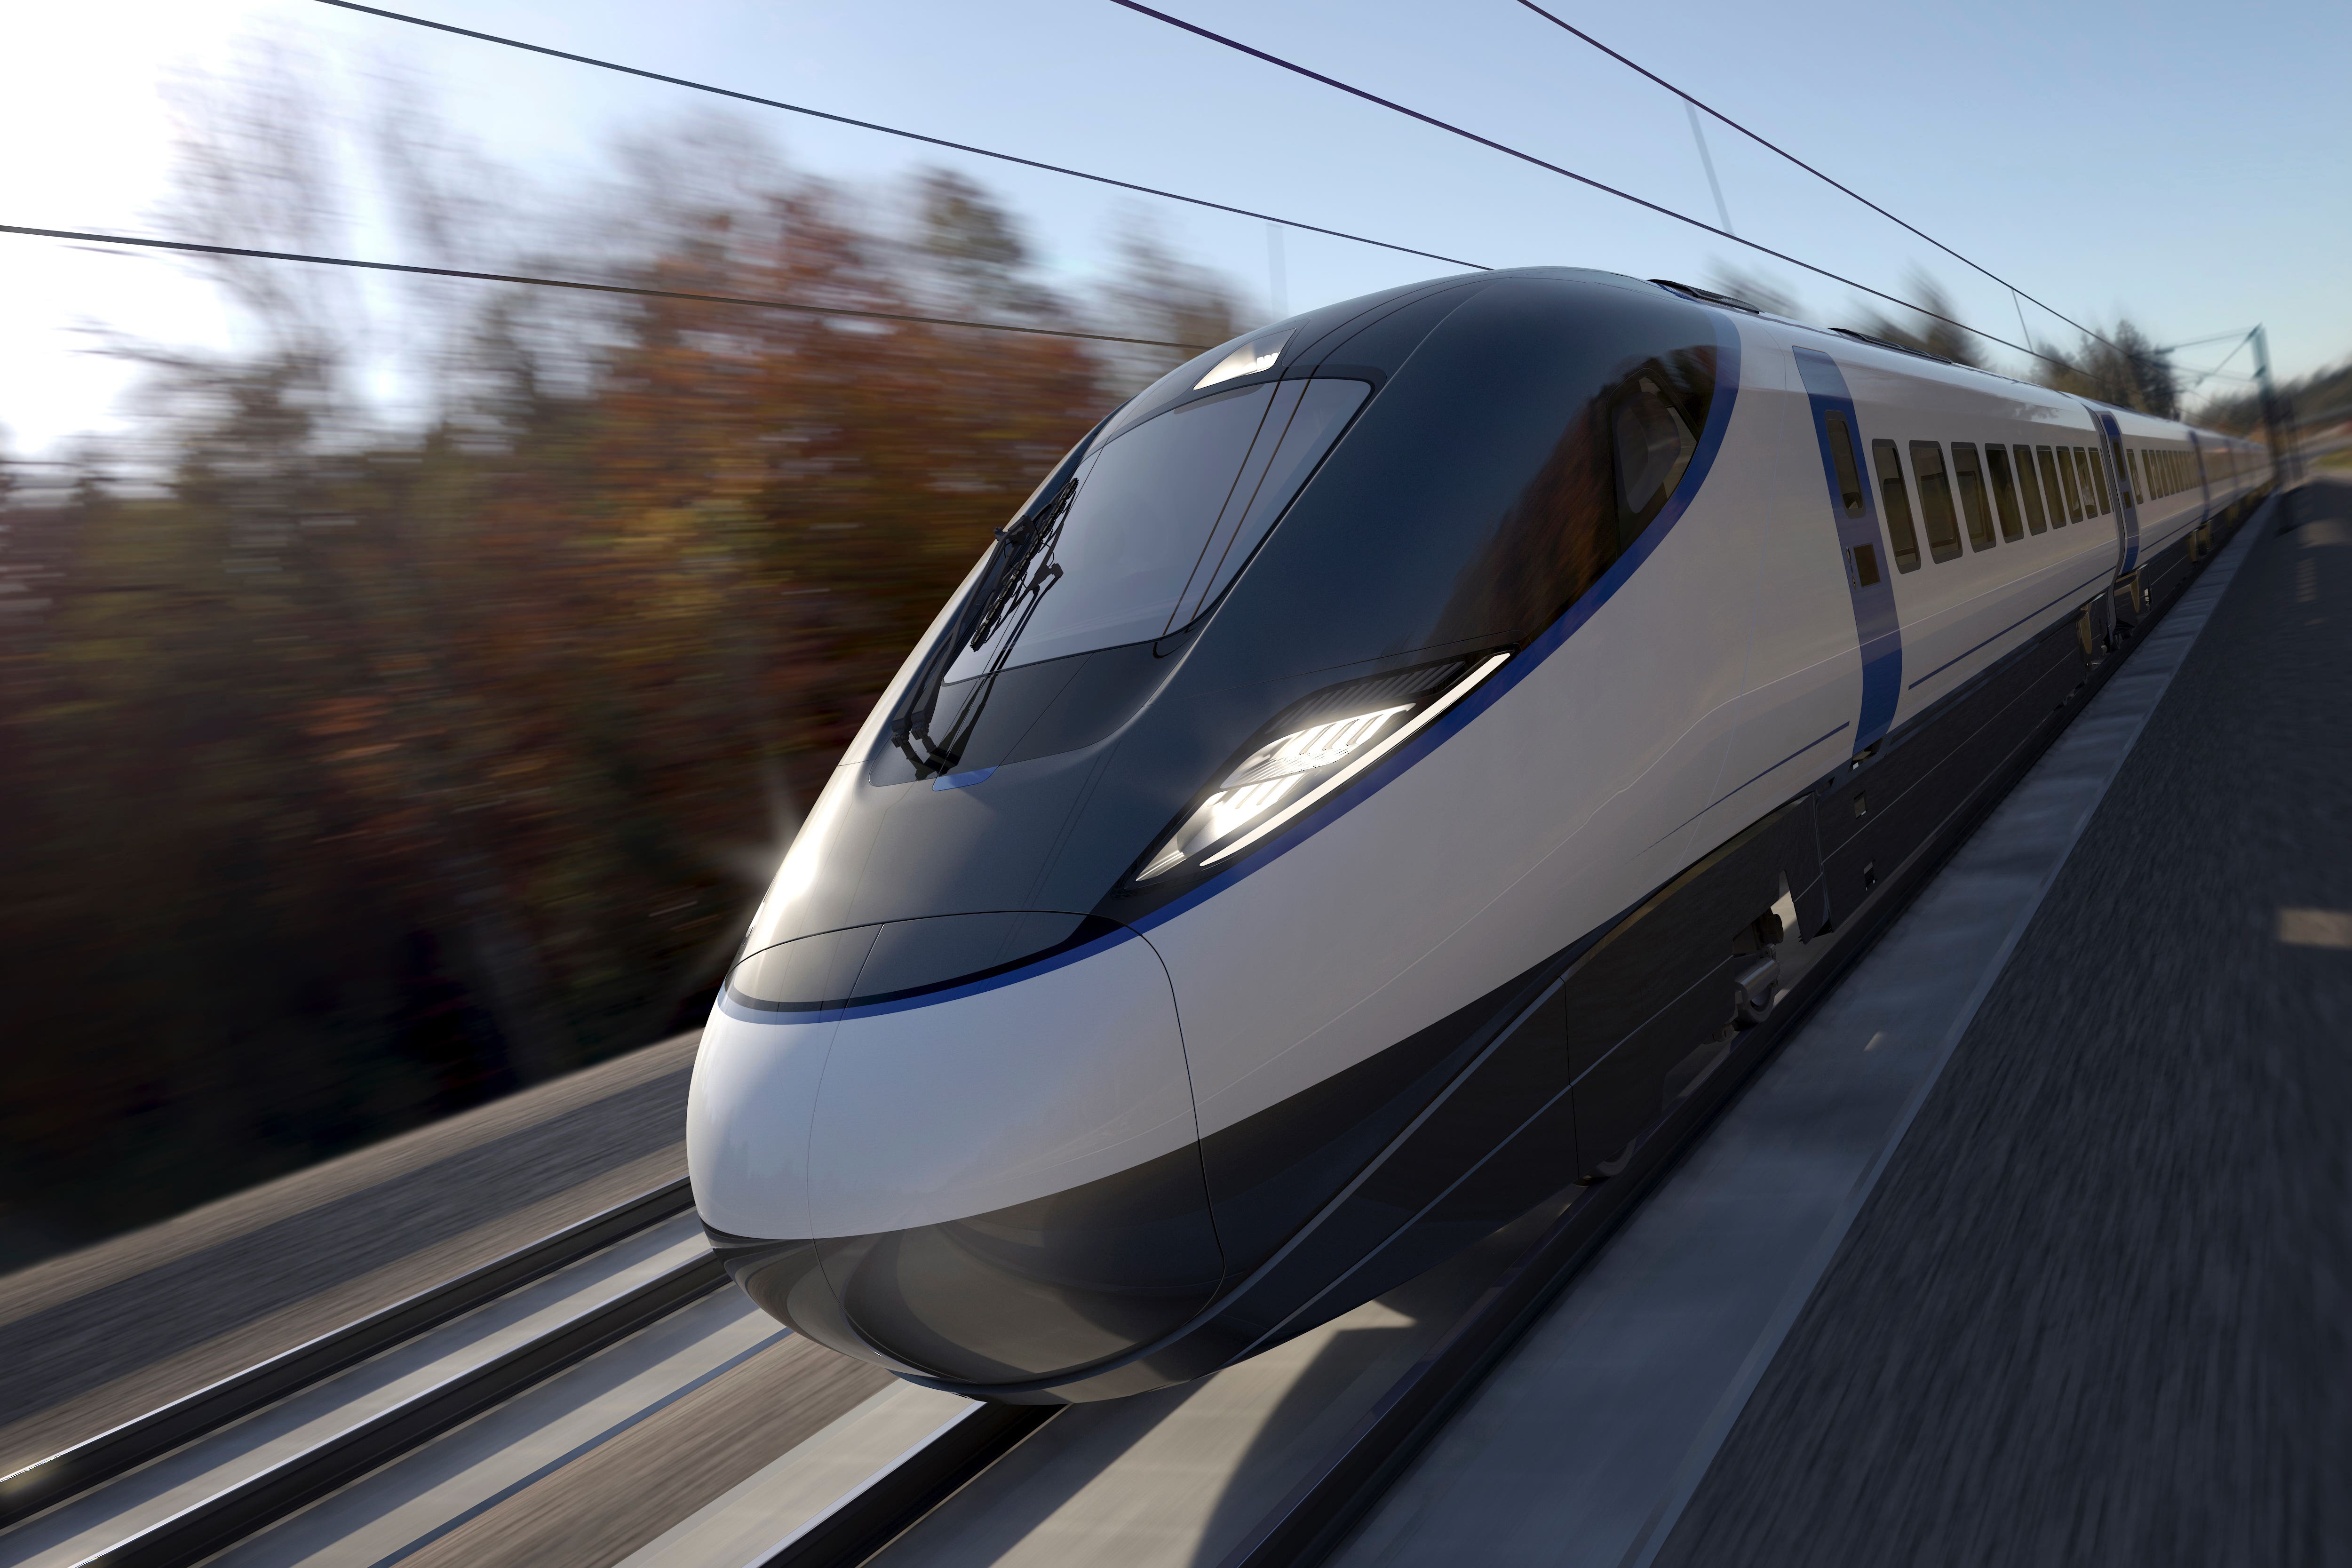 The Independent revealed ministers are considering stopping HS2 at Birmingham due to ballooning costs (HS2/PA)